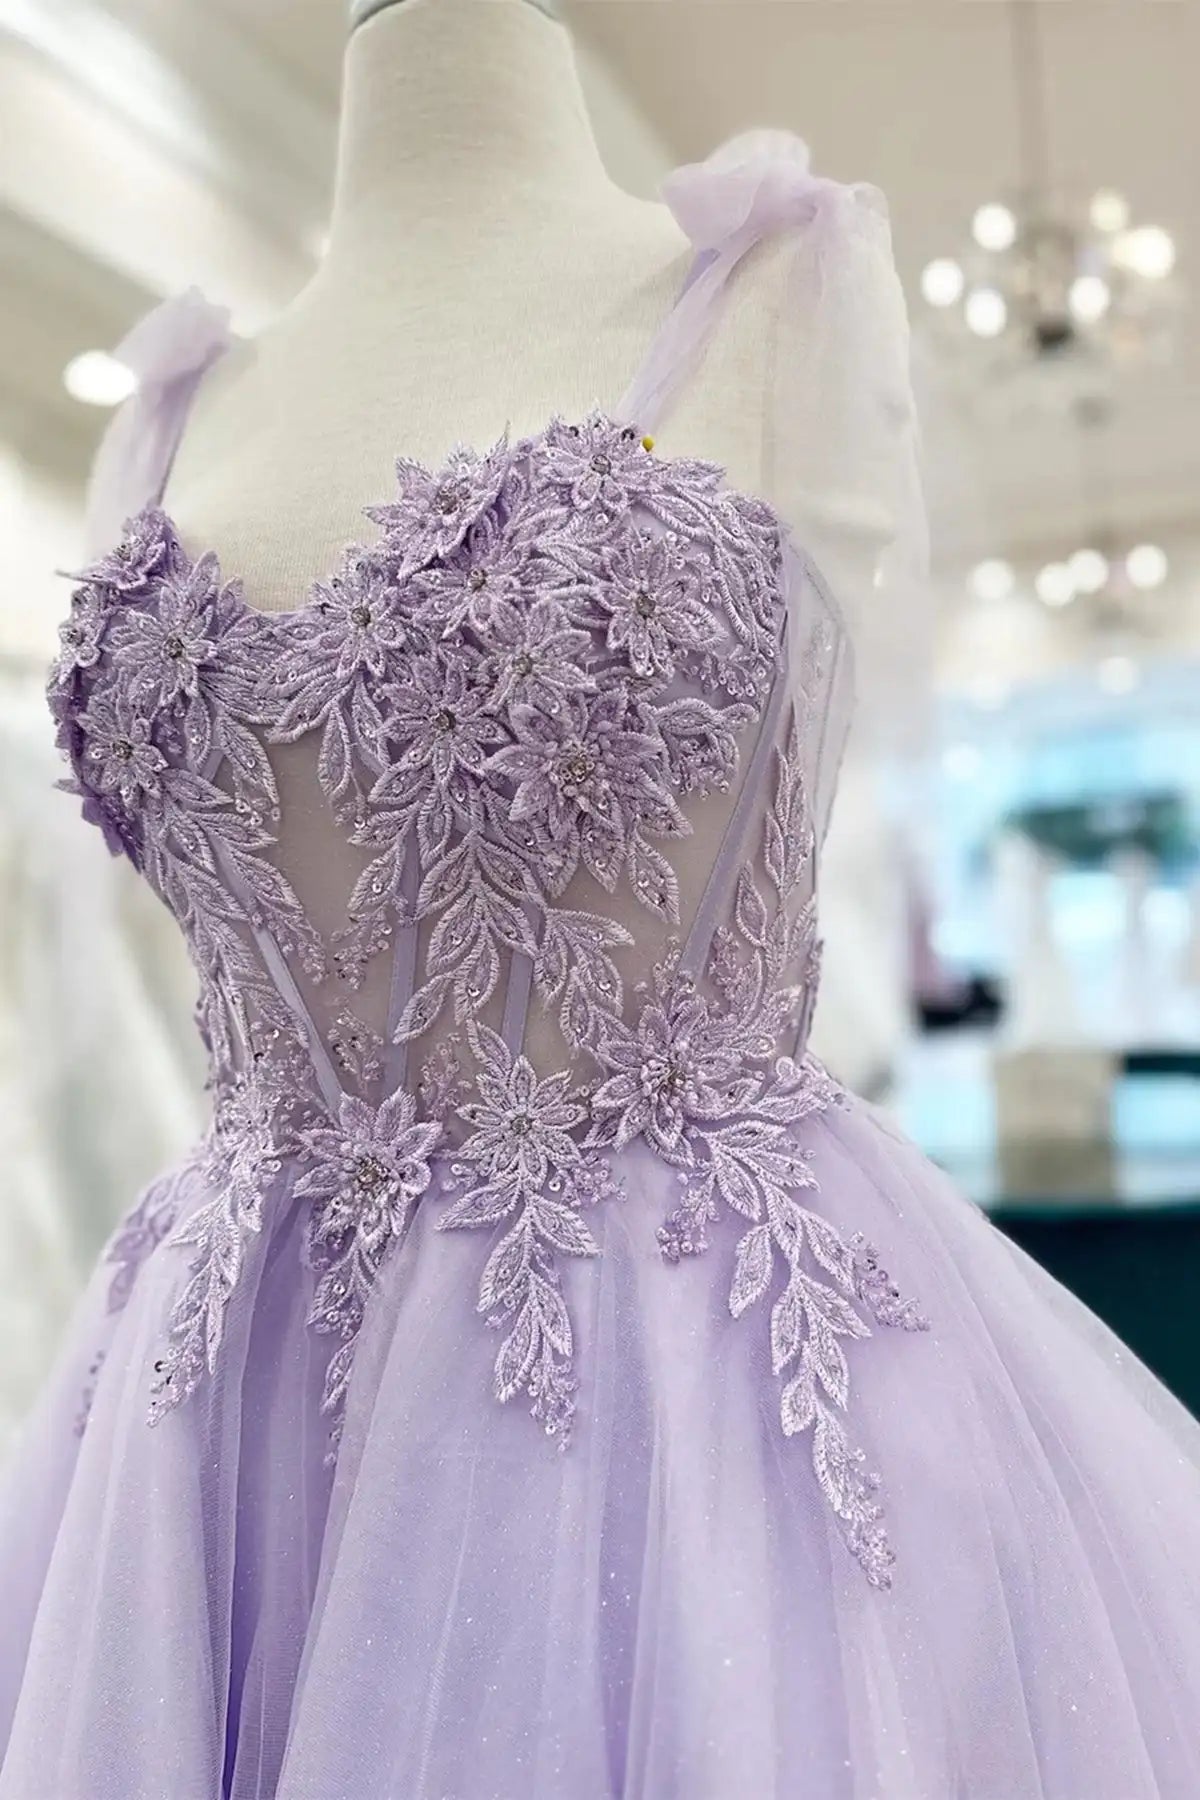 Lilac Short Prom Dresses Sweetheart Lace Applique Beaded Sequined Spaghetti Strap Ball Gown Mini Formal Party Evening Gowns